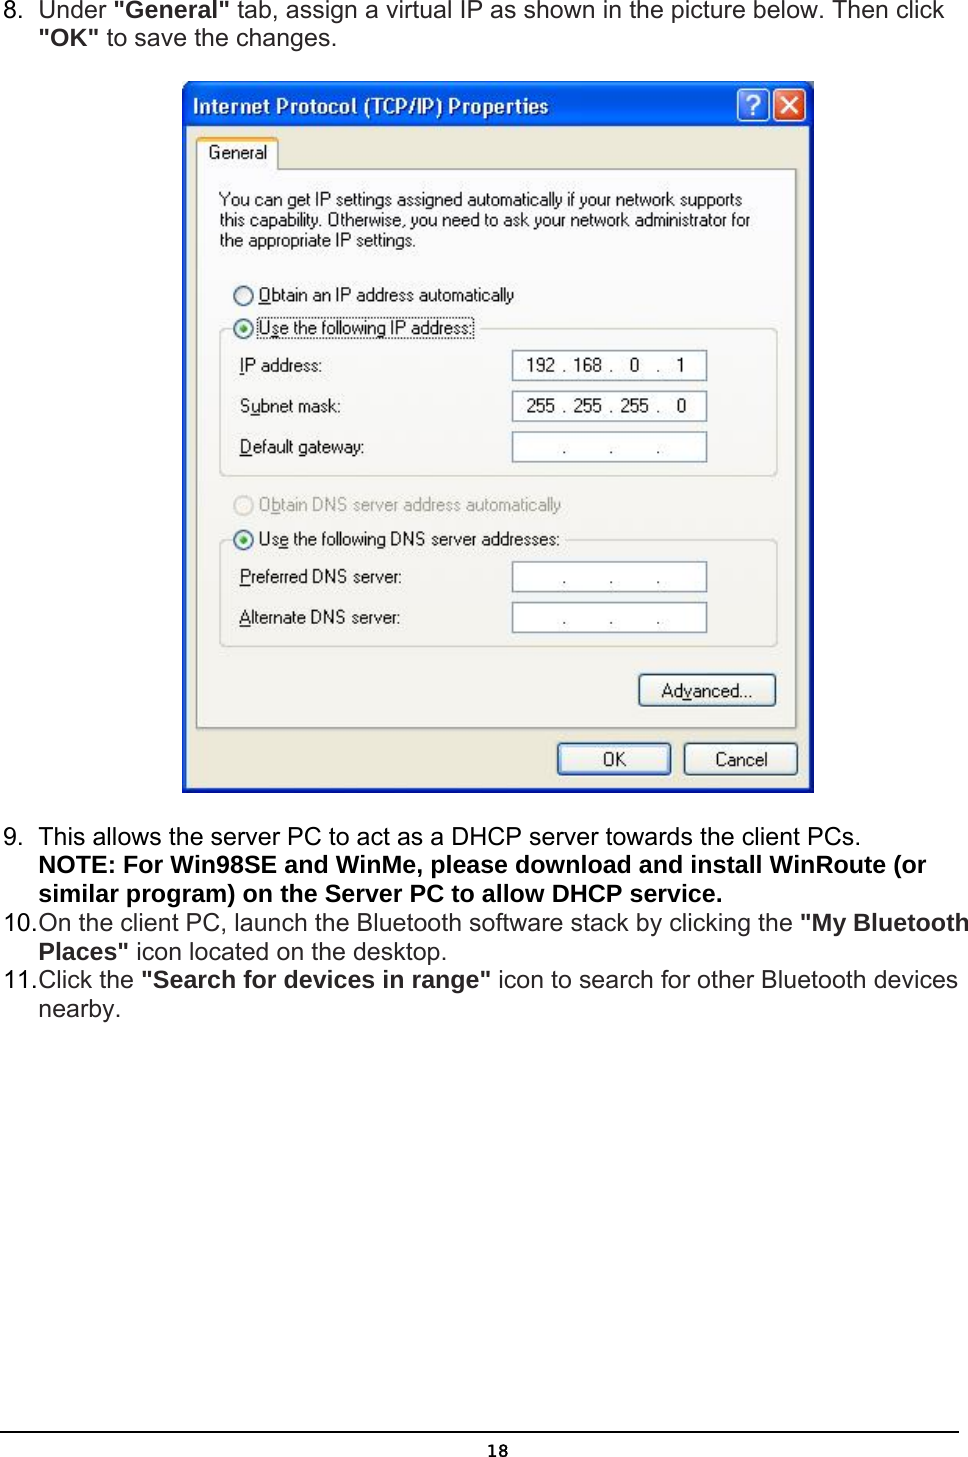   188.  Under &quot;General&quot; tab, assign a virtual IP as shown in the picture below. Then click &quot;OK&quot; to save the changes.  9.  This allows the server PC to act as a DHCP server towards the client PCs.  NOTE: For Win98SE and WinMe, please download and install WinRoute (or similar program) on the Server PC to allow DHCP service. 10. On the client PC, launch the Bluetooth software stack by clicking the &quot;My Bluetooth Places&quot; icon located on the desktop. 11. Click the &quot;Search for devices in range&quot; icon to search for other Bluetooth devices nearby. 